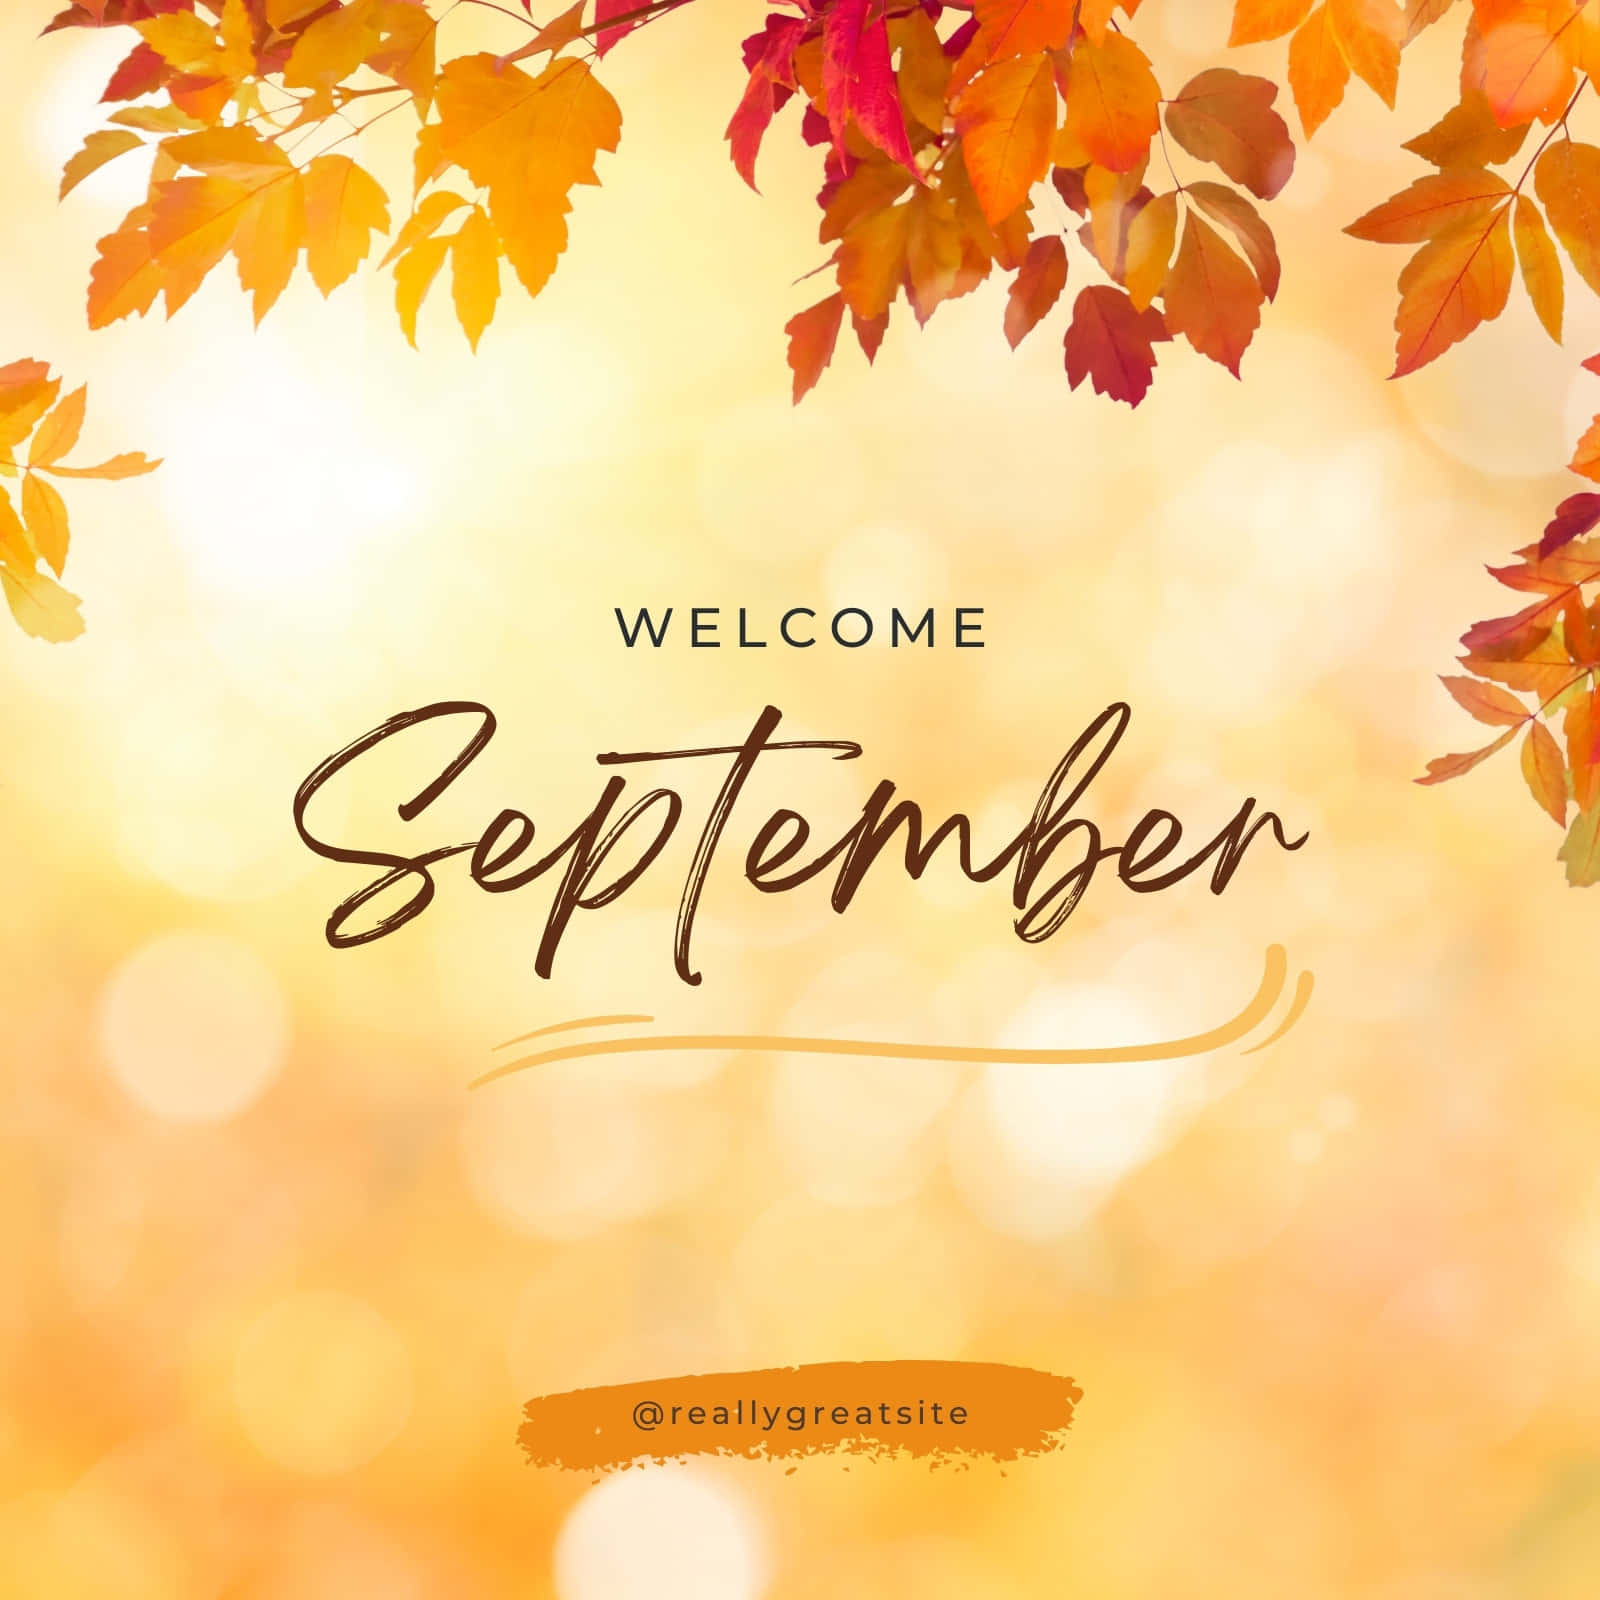 Celebrate the changing of the season with September!